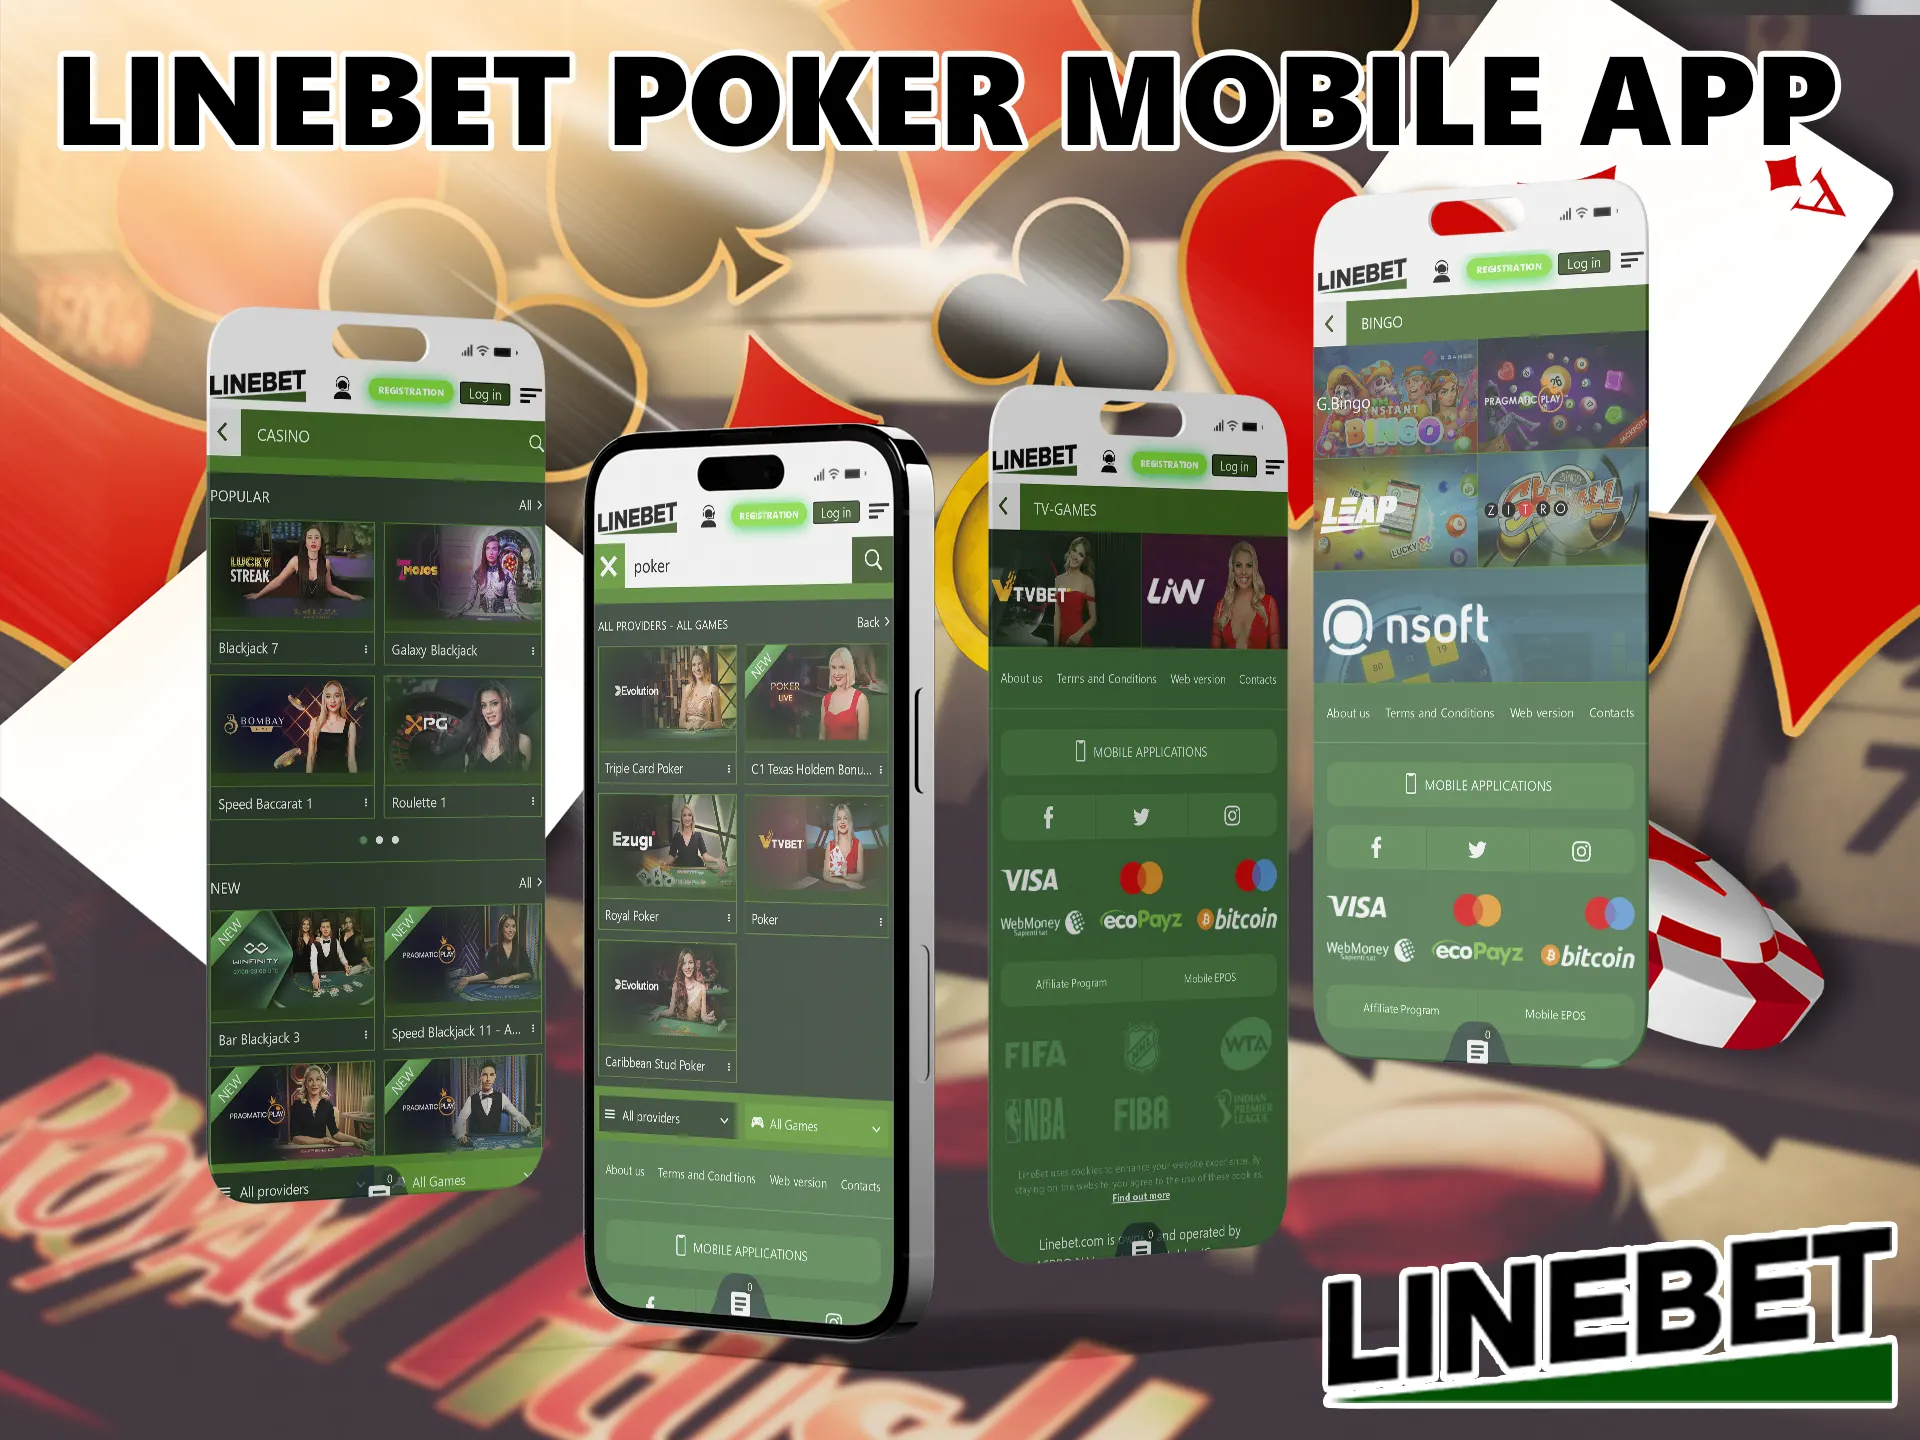 Anyone who lives in India can enjoy playing casino games anywhere in the convenience of the Linebet software.